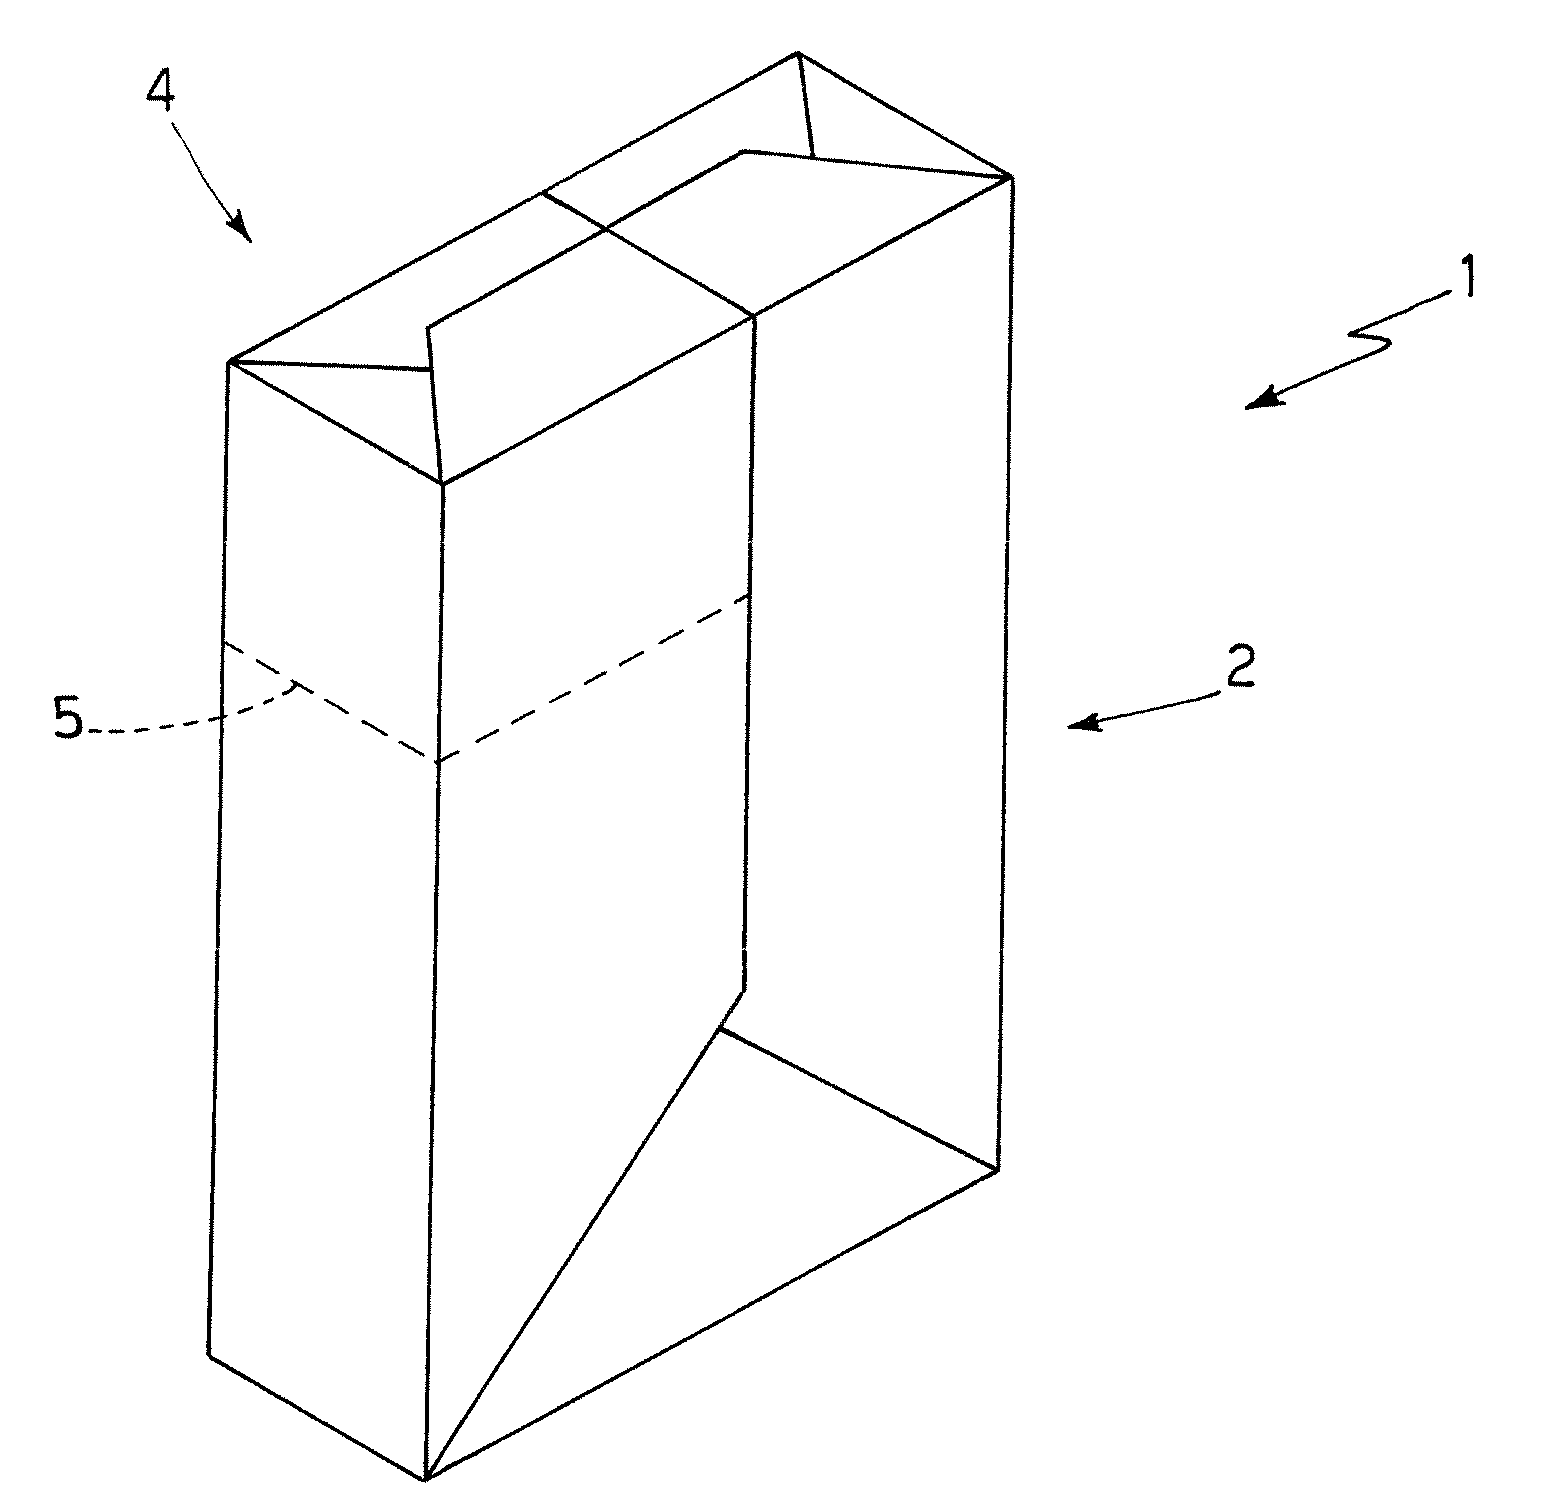 Method of folding a sheet of packing material about a group of cigarettes